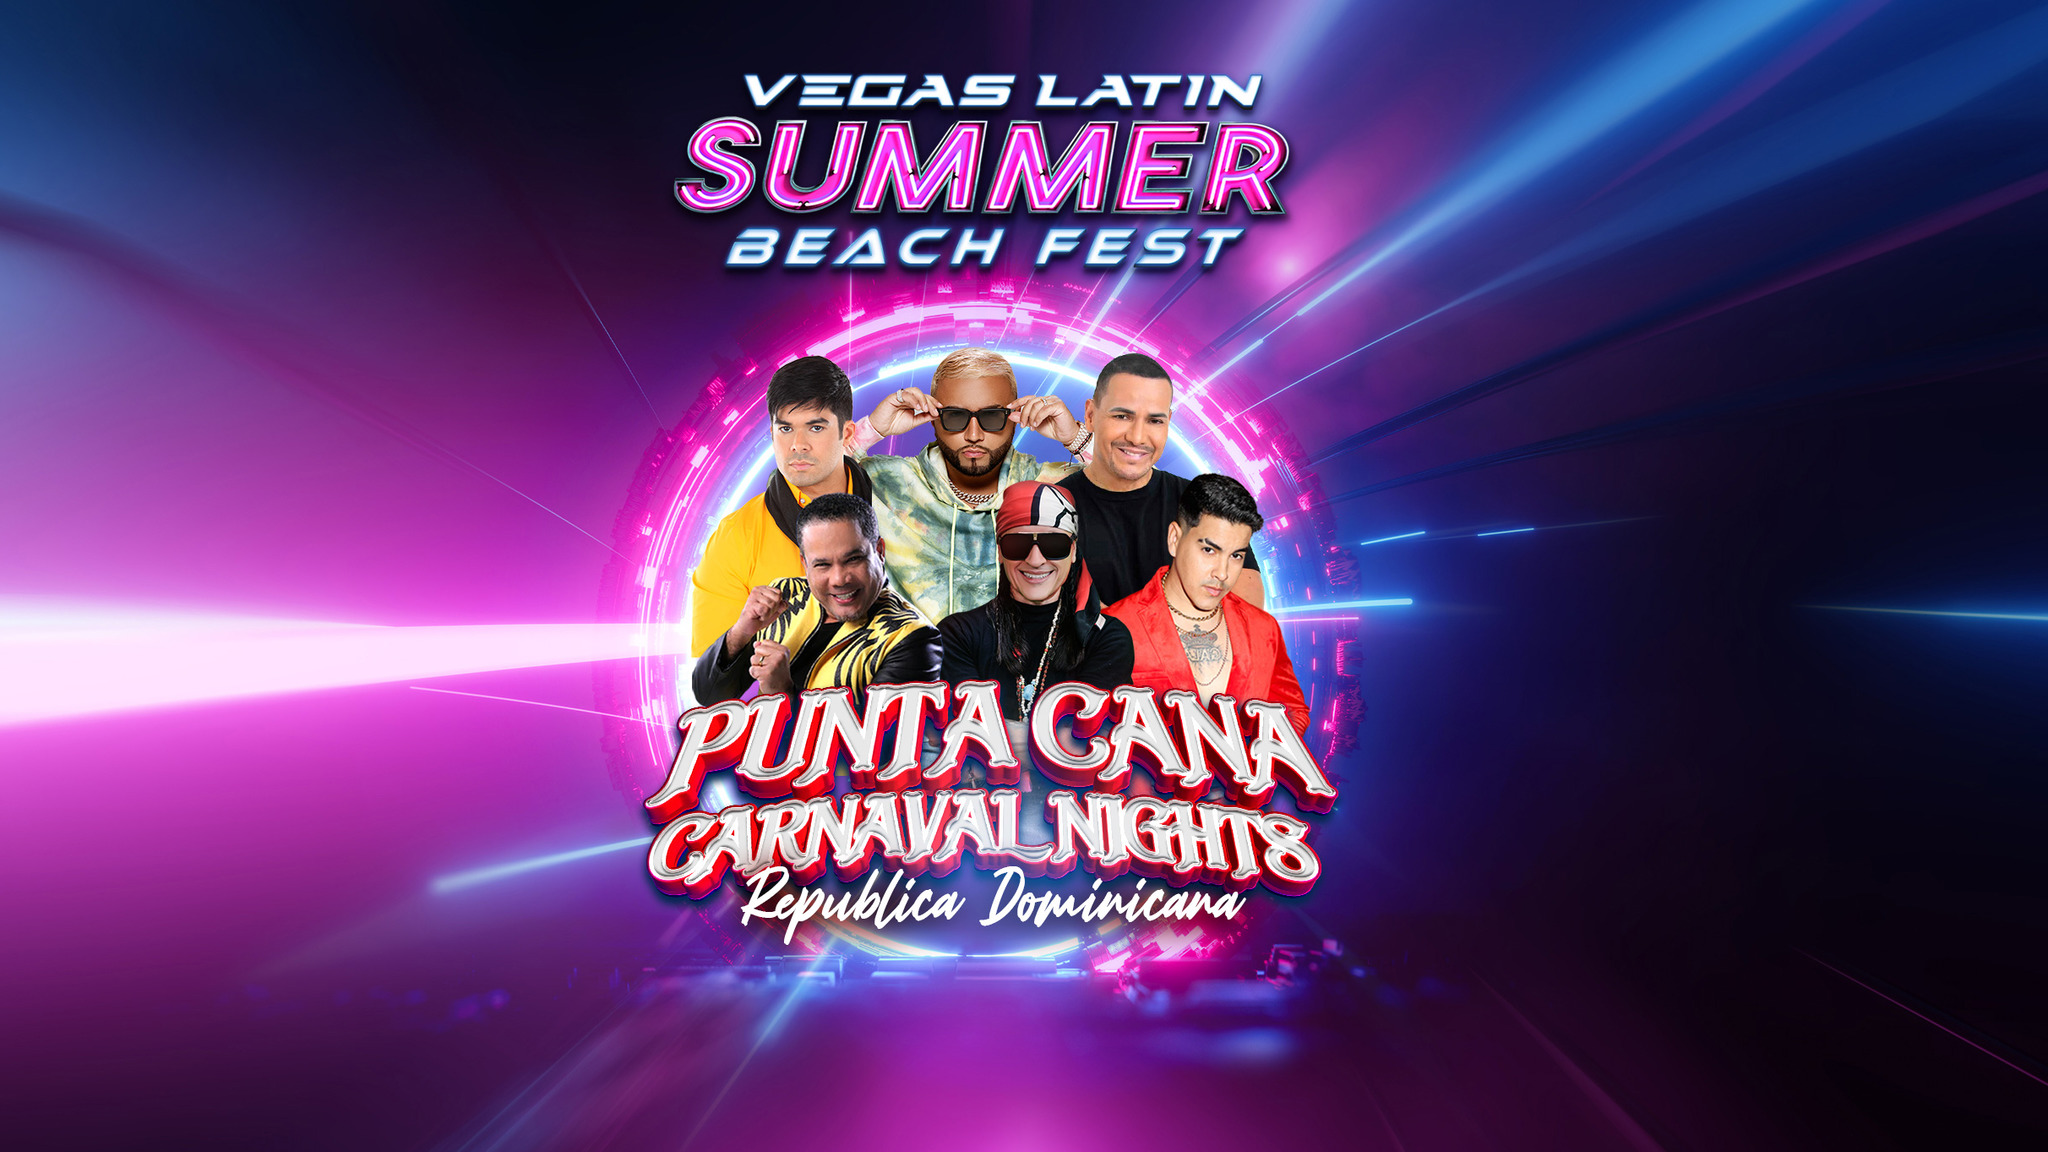 VLS FEST BEACH PARTY Punta Cana Carnaval Night Tickets, 2023 Concert